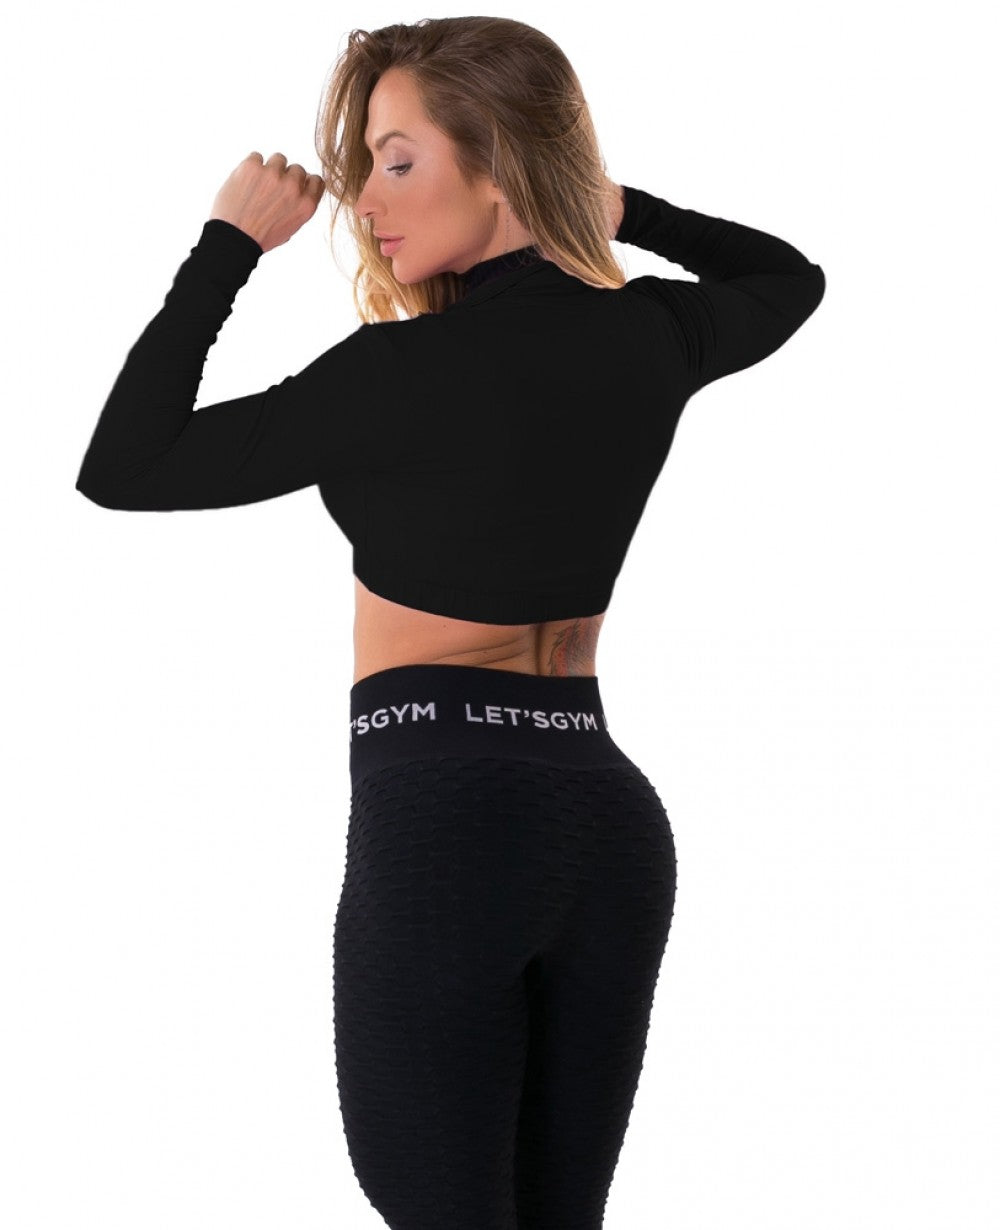 Women's Women's Workout Crop Tops | Gym & Fitness Clothing | Gymshark |  Graphic crop top, Crop tops, Womens workout outfits